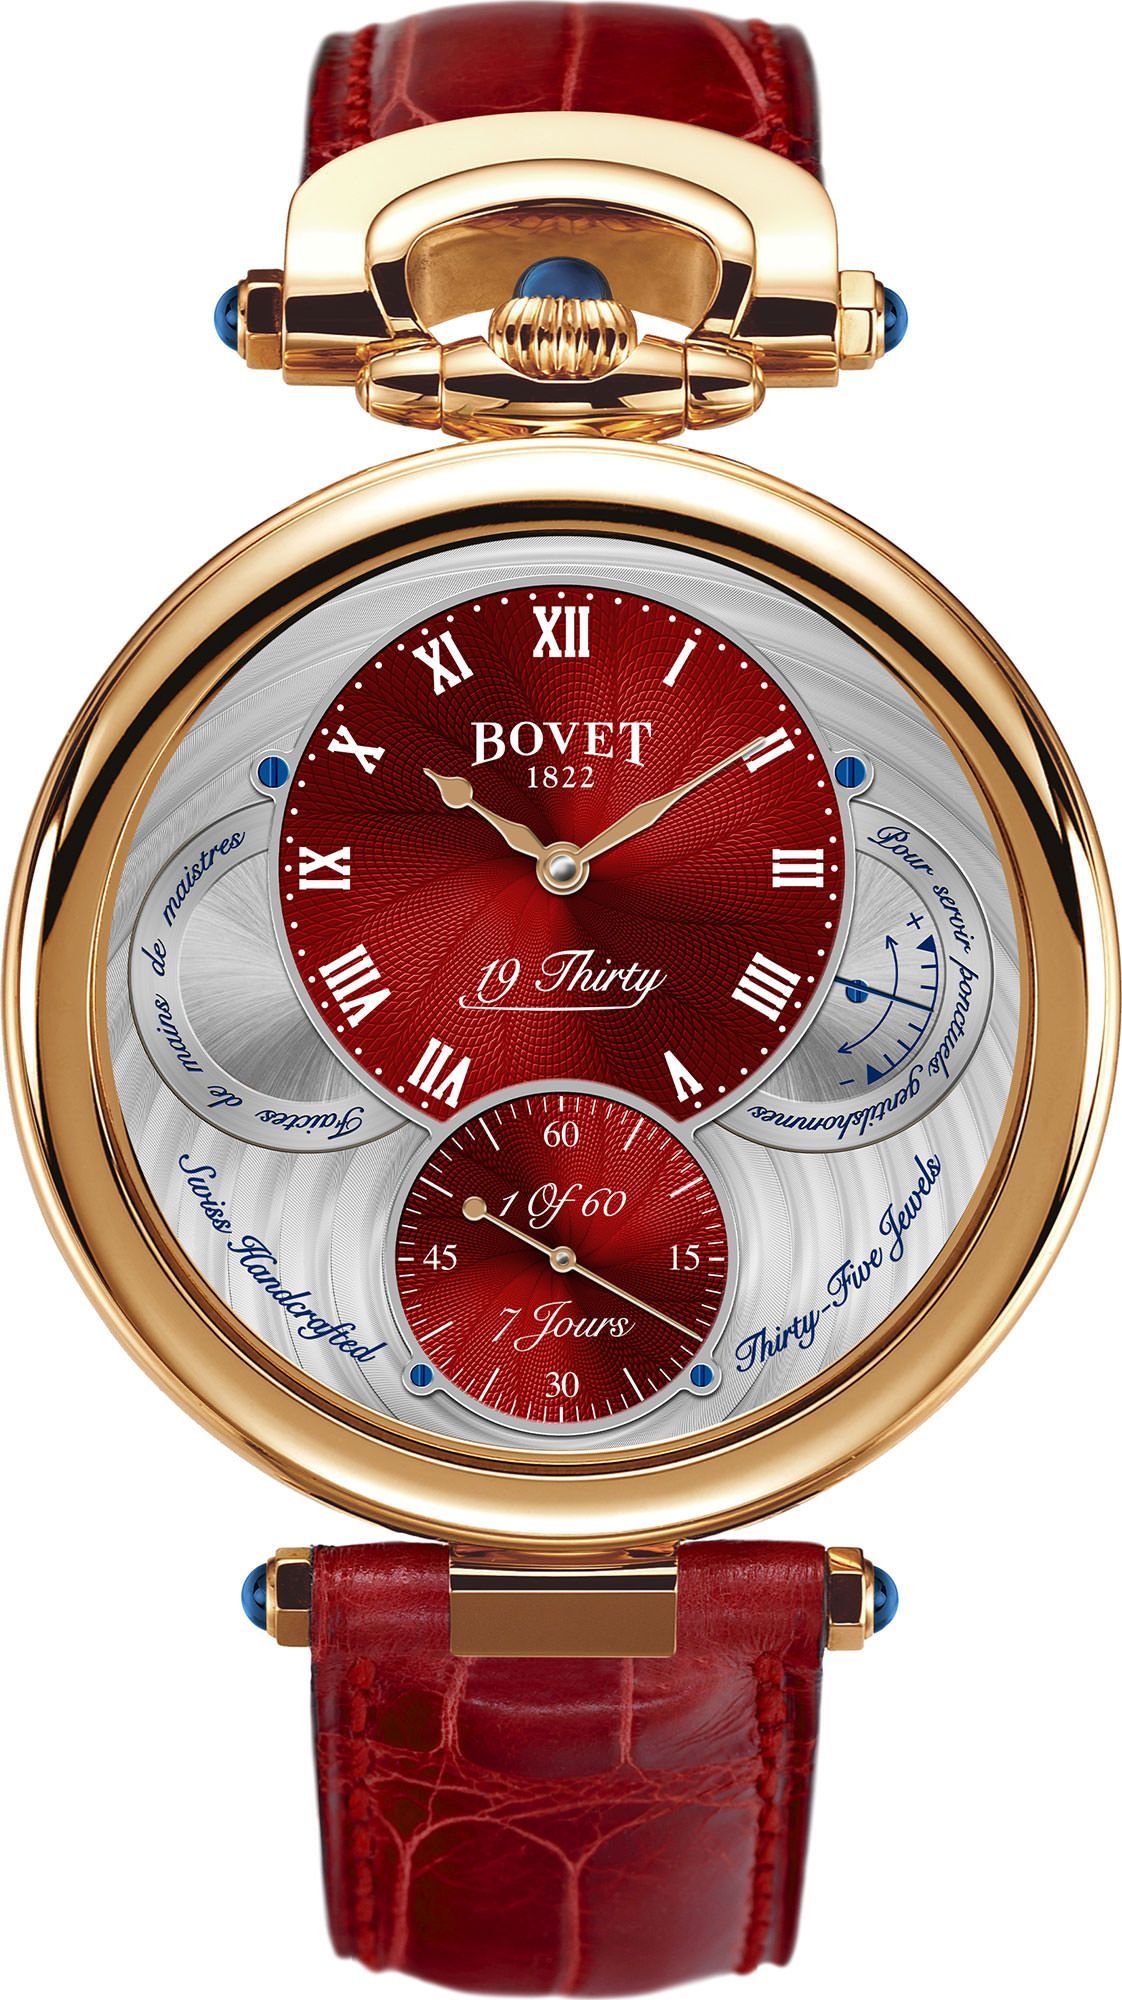 Bovet Fleurier 19Thirty Great Guilloché Red Dial 42 mm Manual Winding Watch For Men - 1